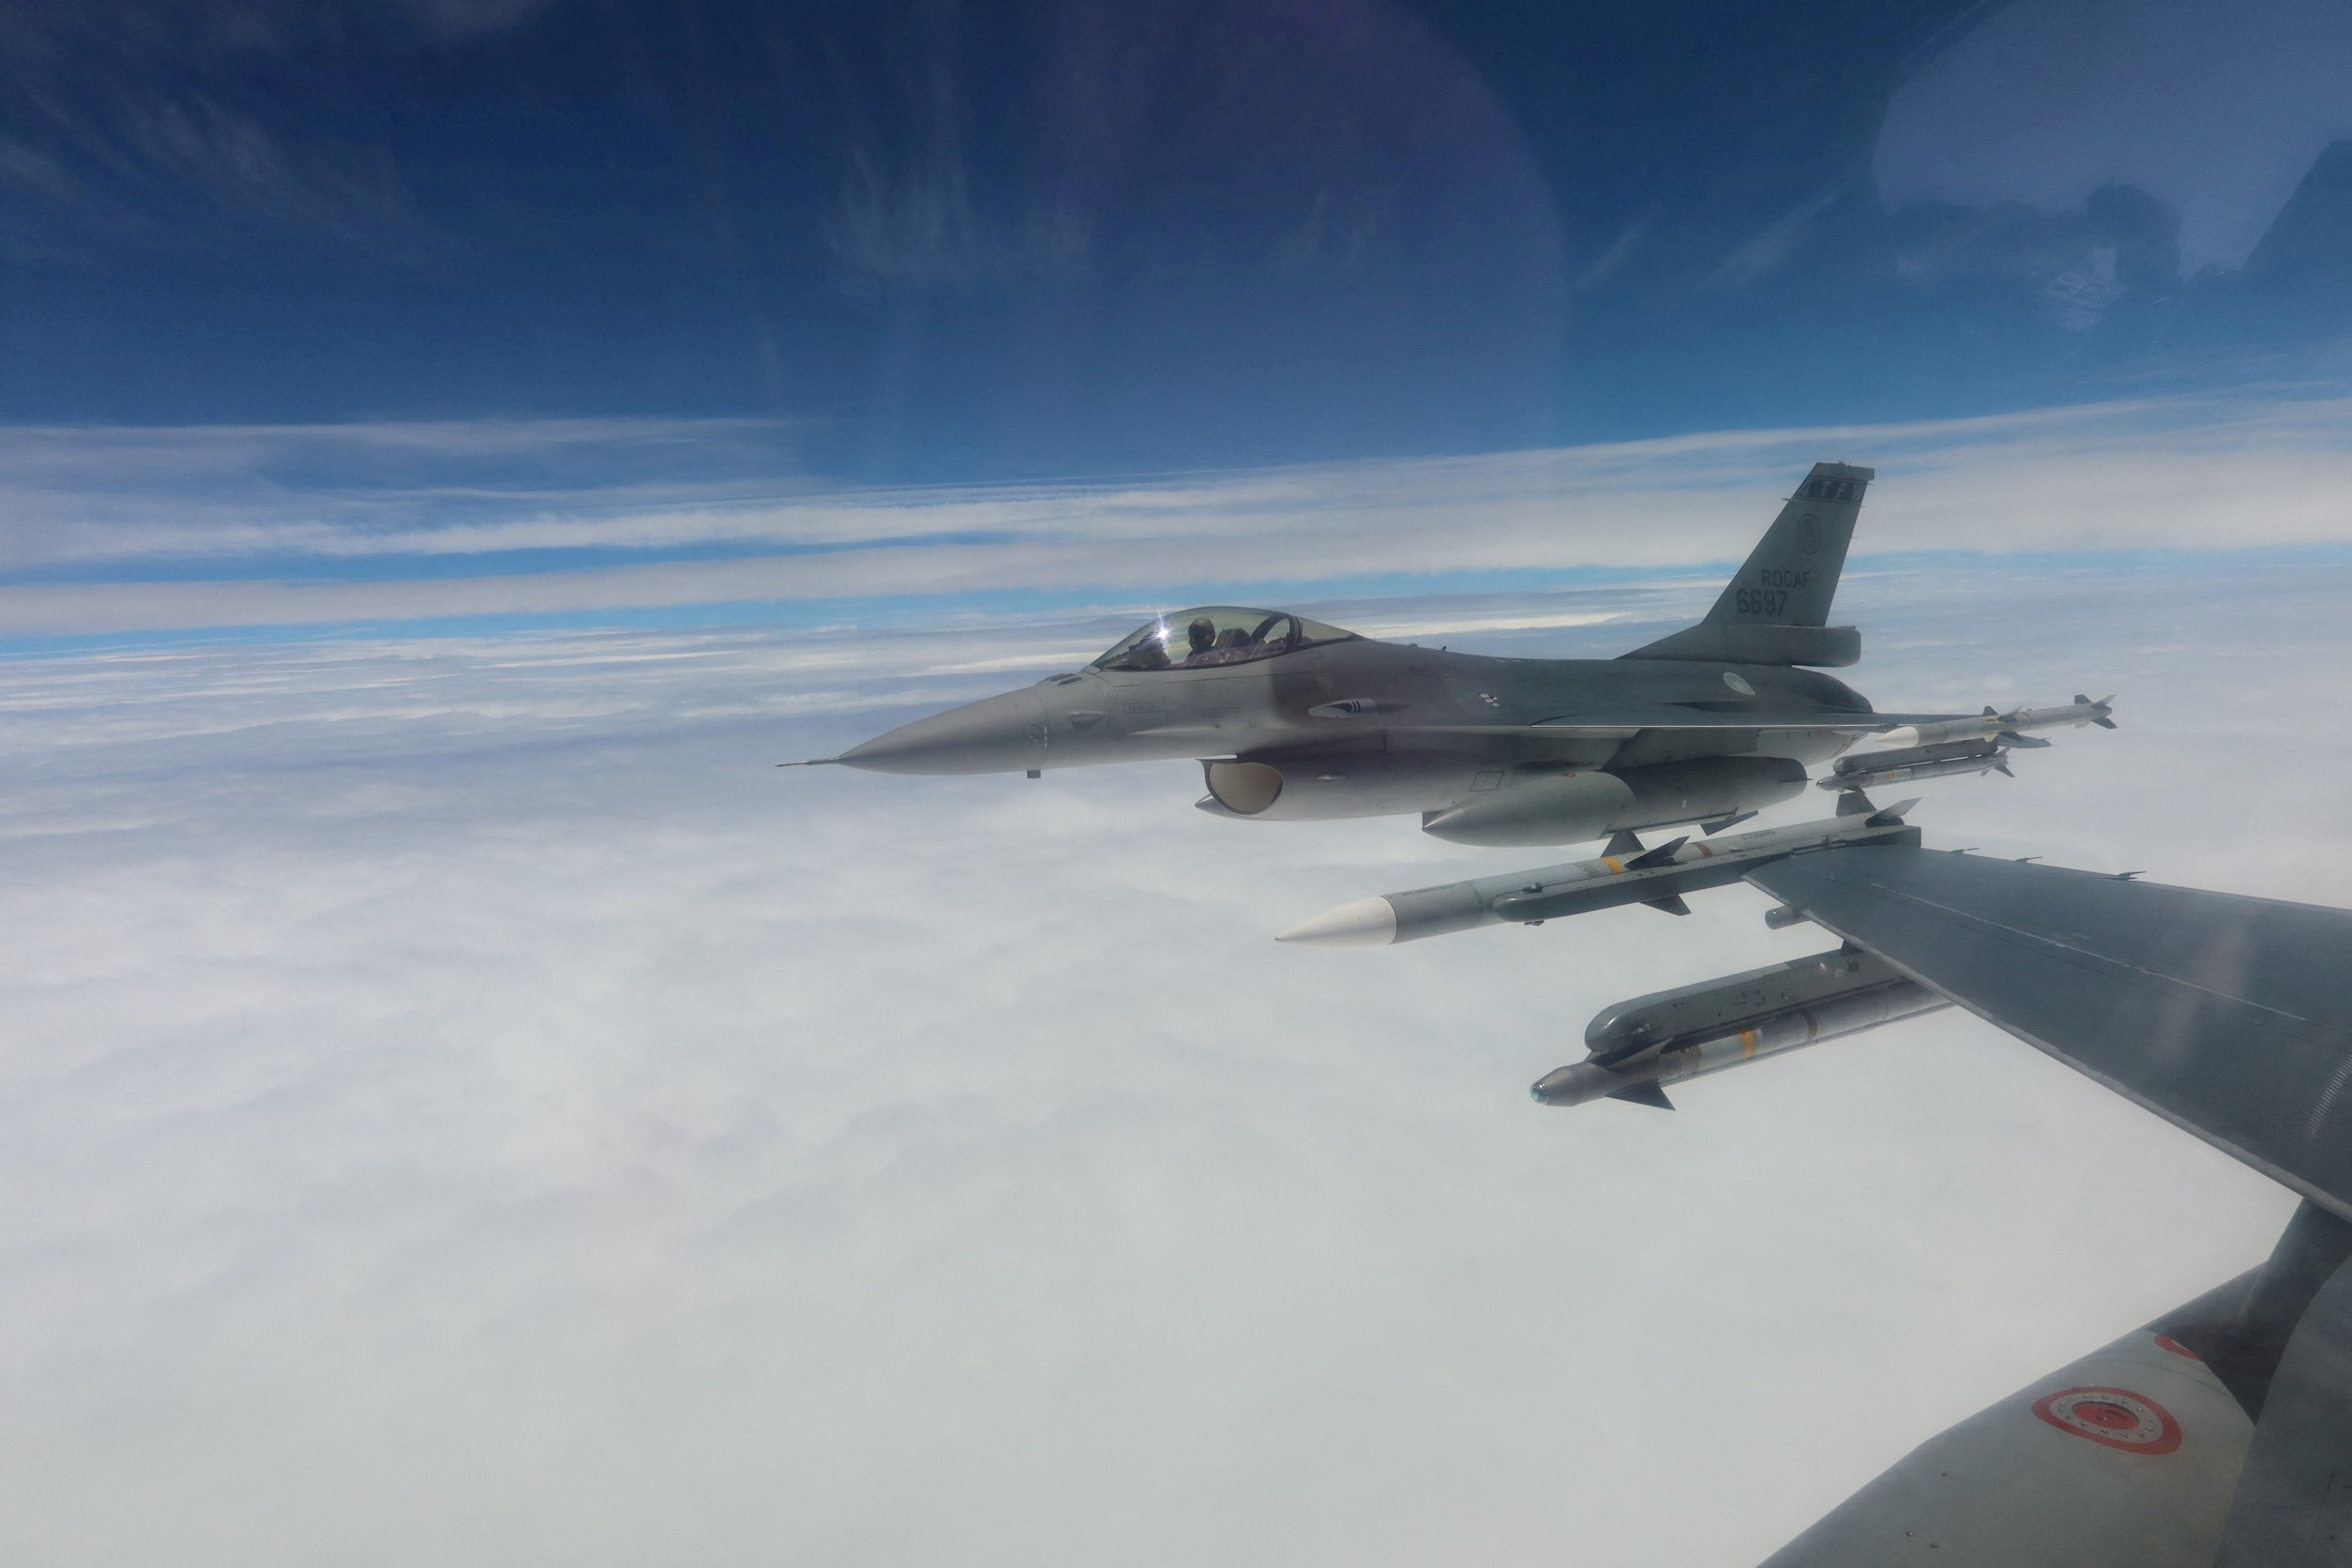 Taiwan Air Force F-16 aircrafts fly during a patrolling mission at an undisclosed location in Taiwan